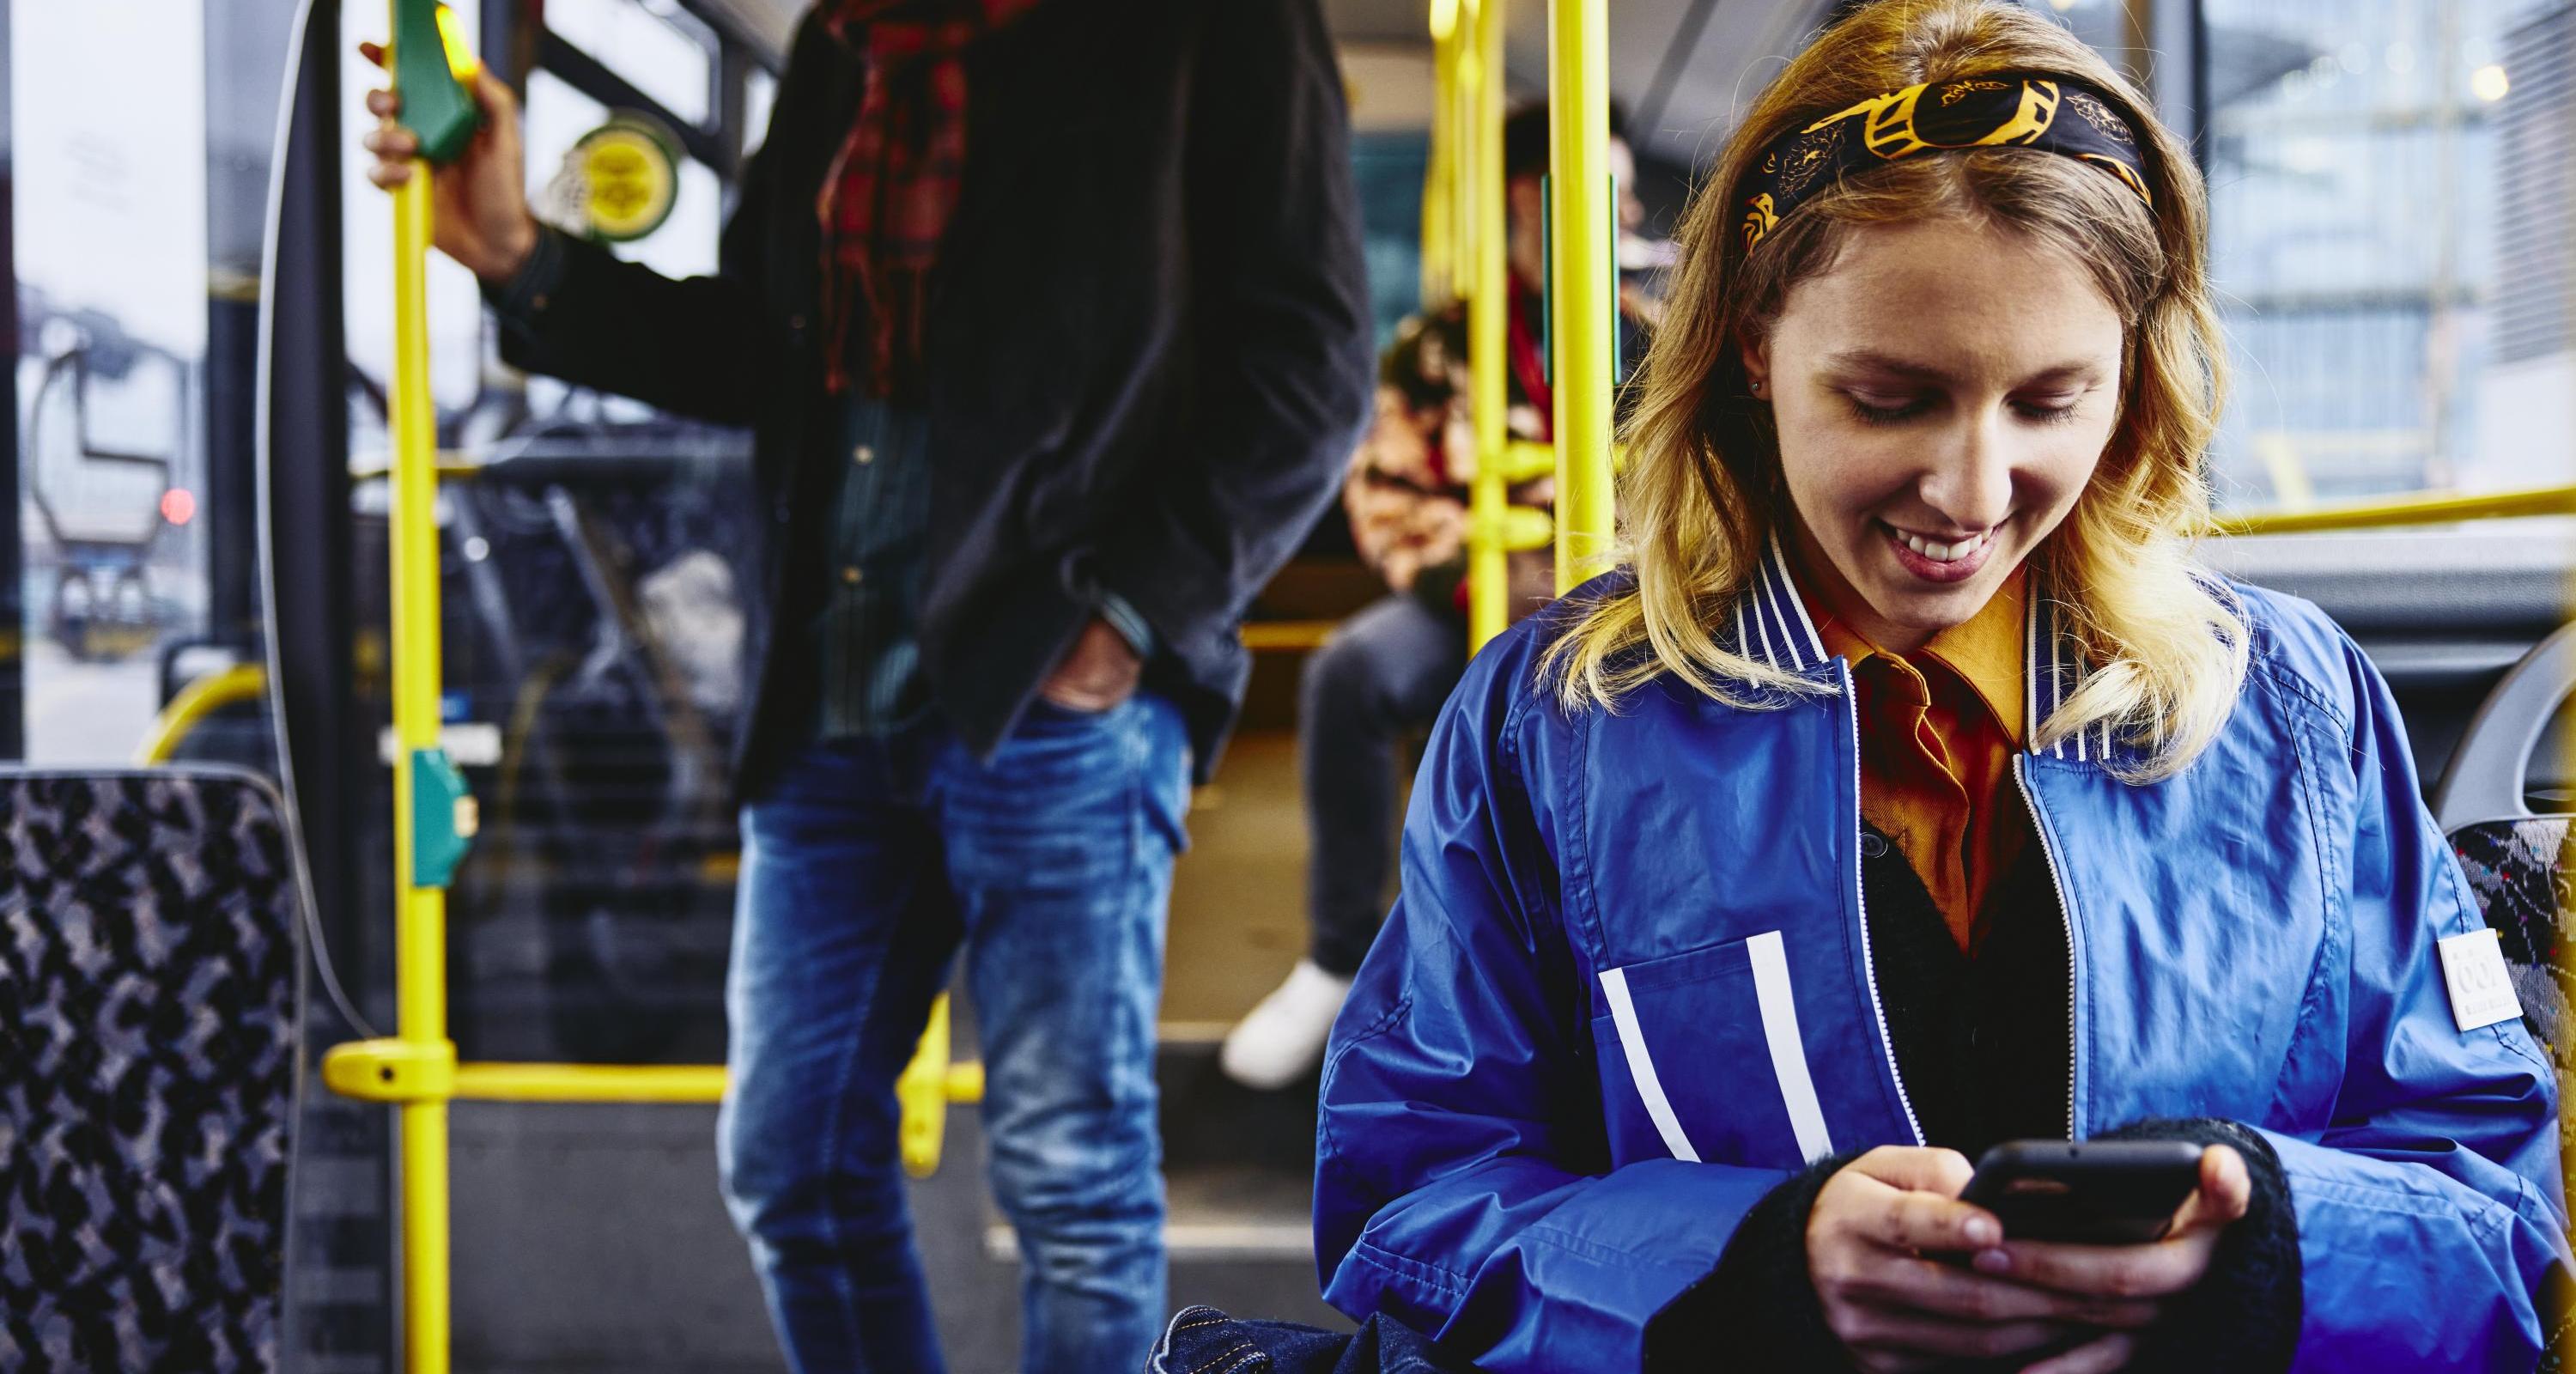 Smiling woman sitting in a bus, looking at her phone. Other people in the background.